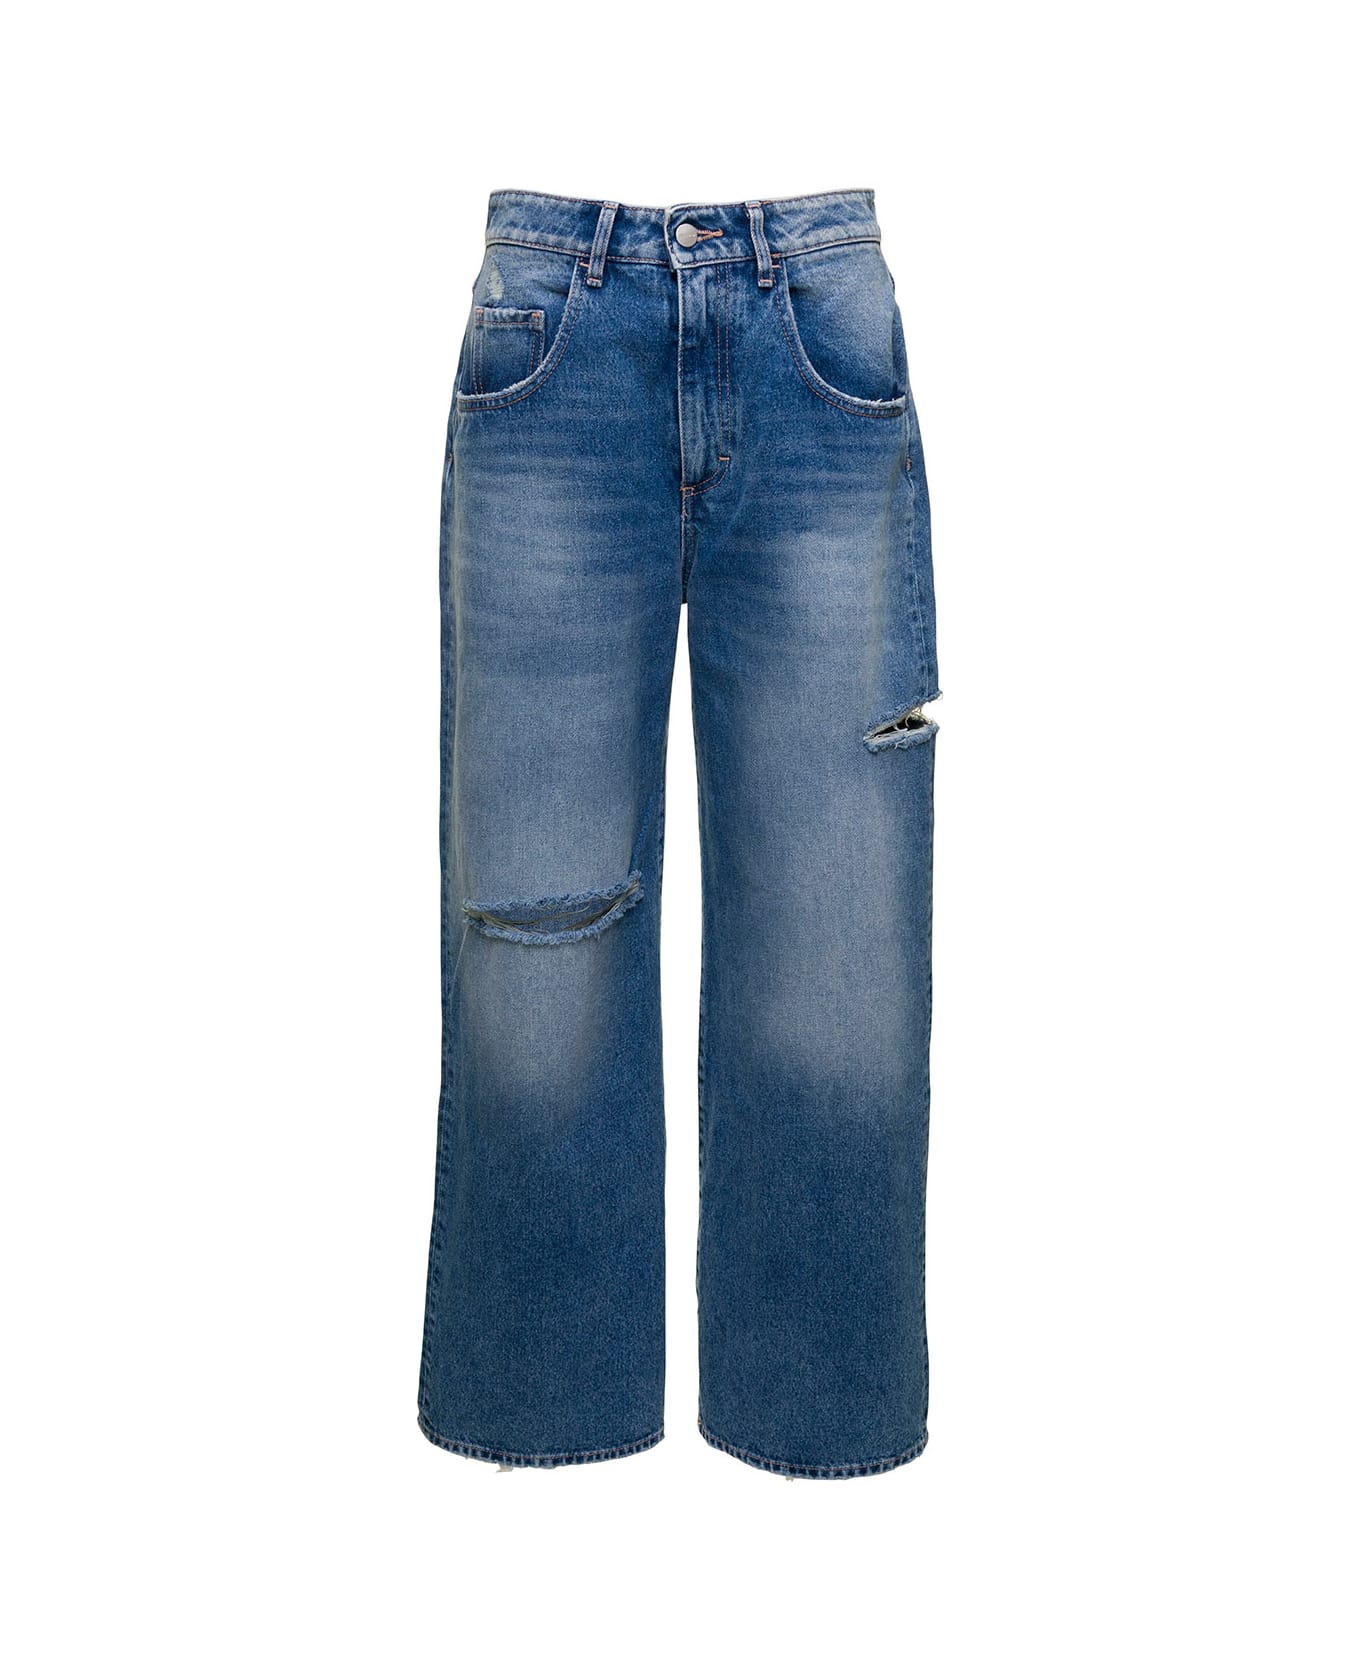 Icon Denim Light Blue High-waisted Jeans With Rips In Organic Cotton Denim Woman - Denim